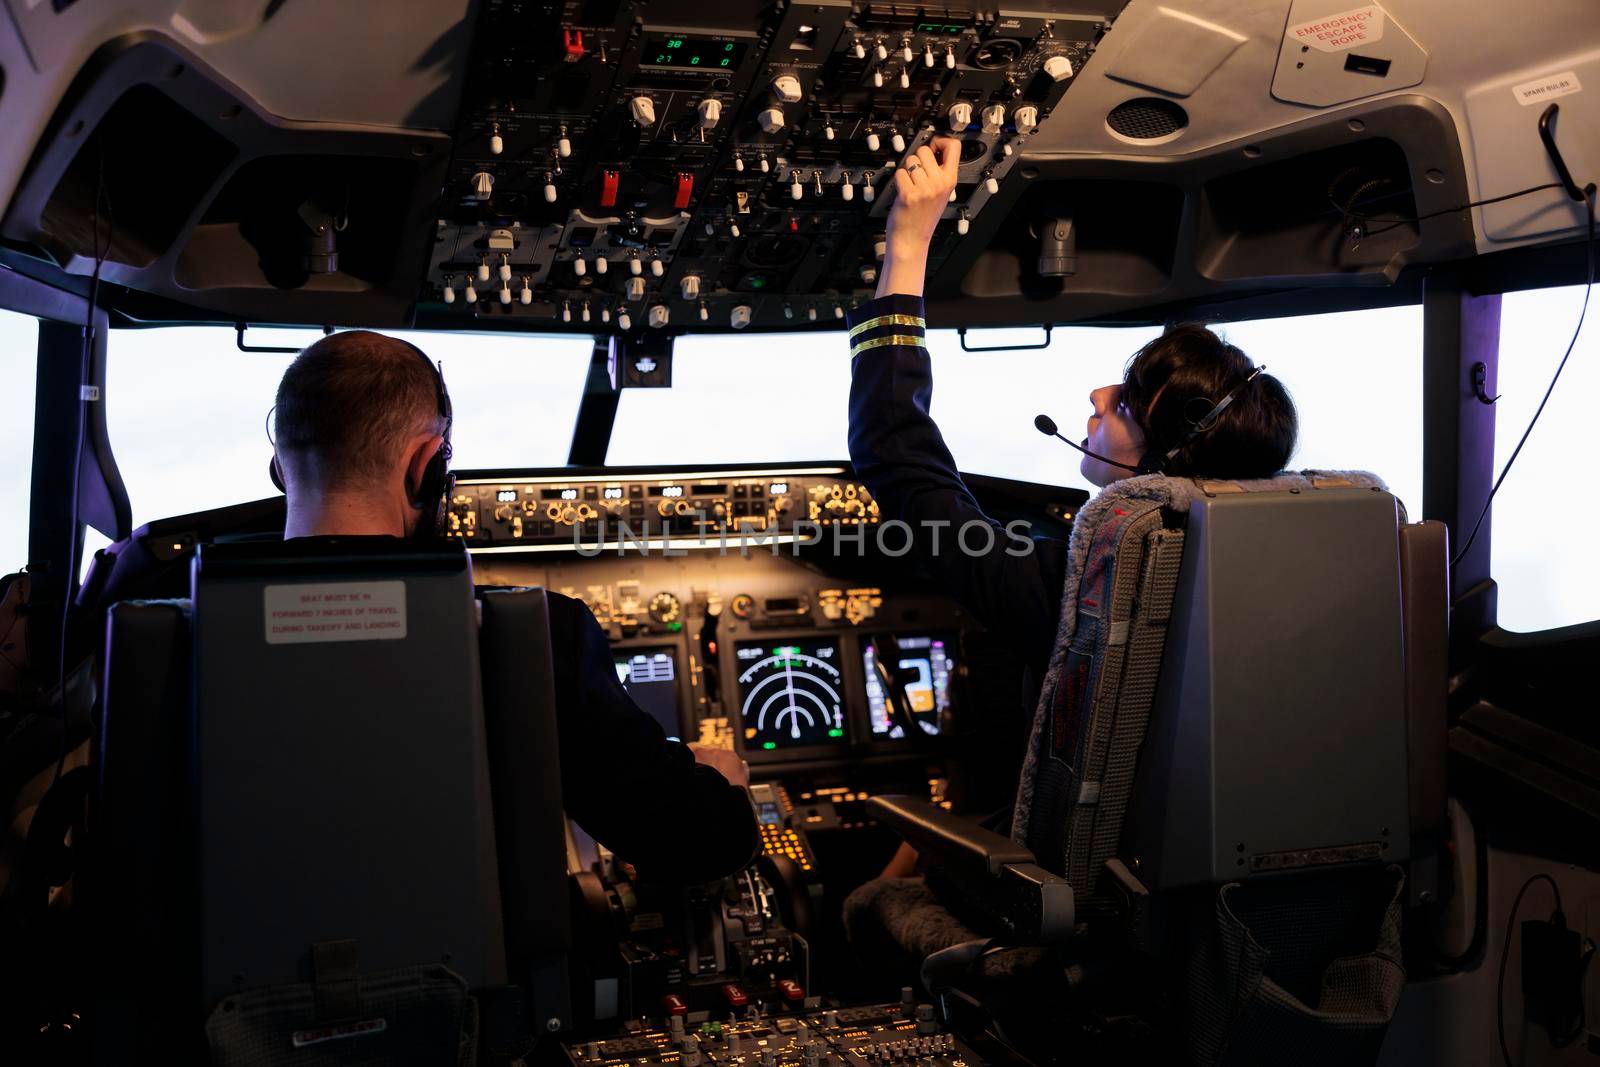 Aircrew members flying airplane with dashboard command, using control panel and navigation windscreen. Piloting aircraft with power lever switch and handle in aviation cockpit cabin.